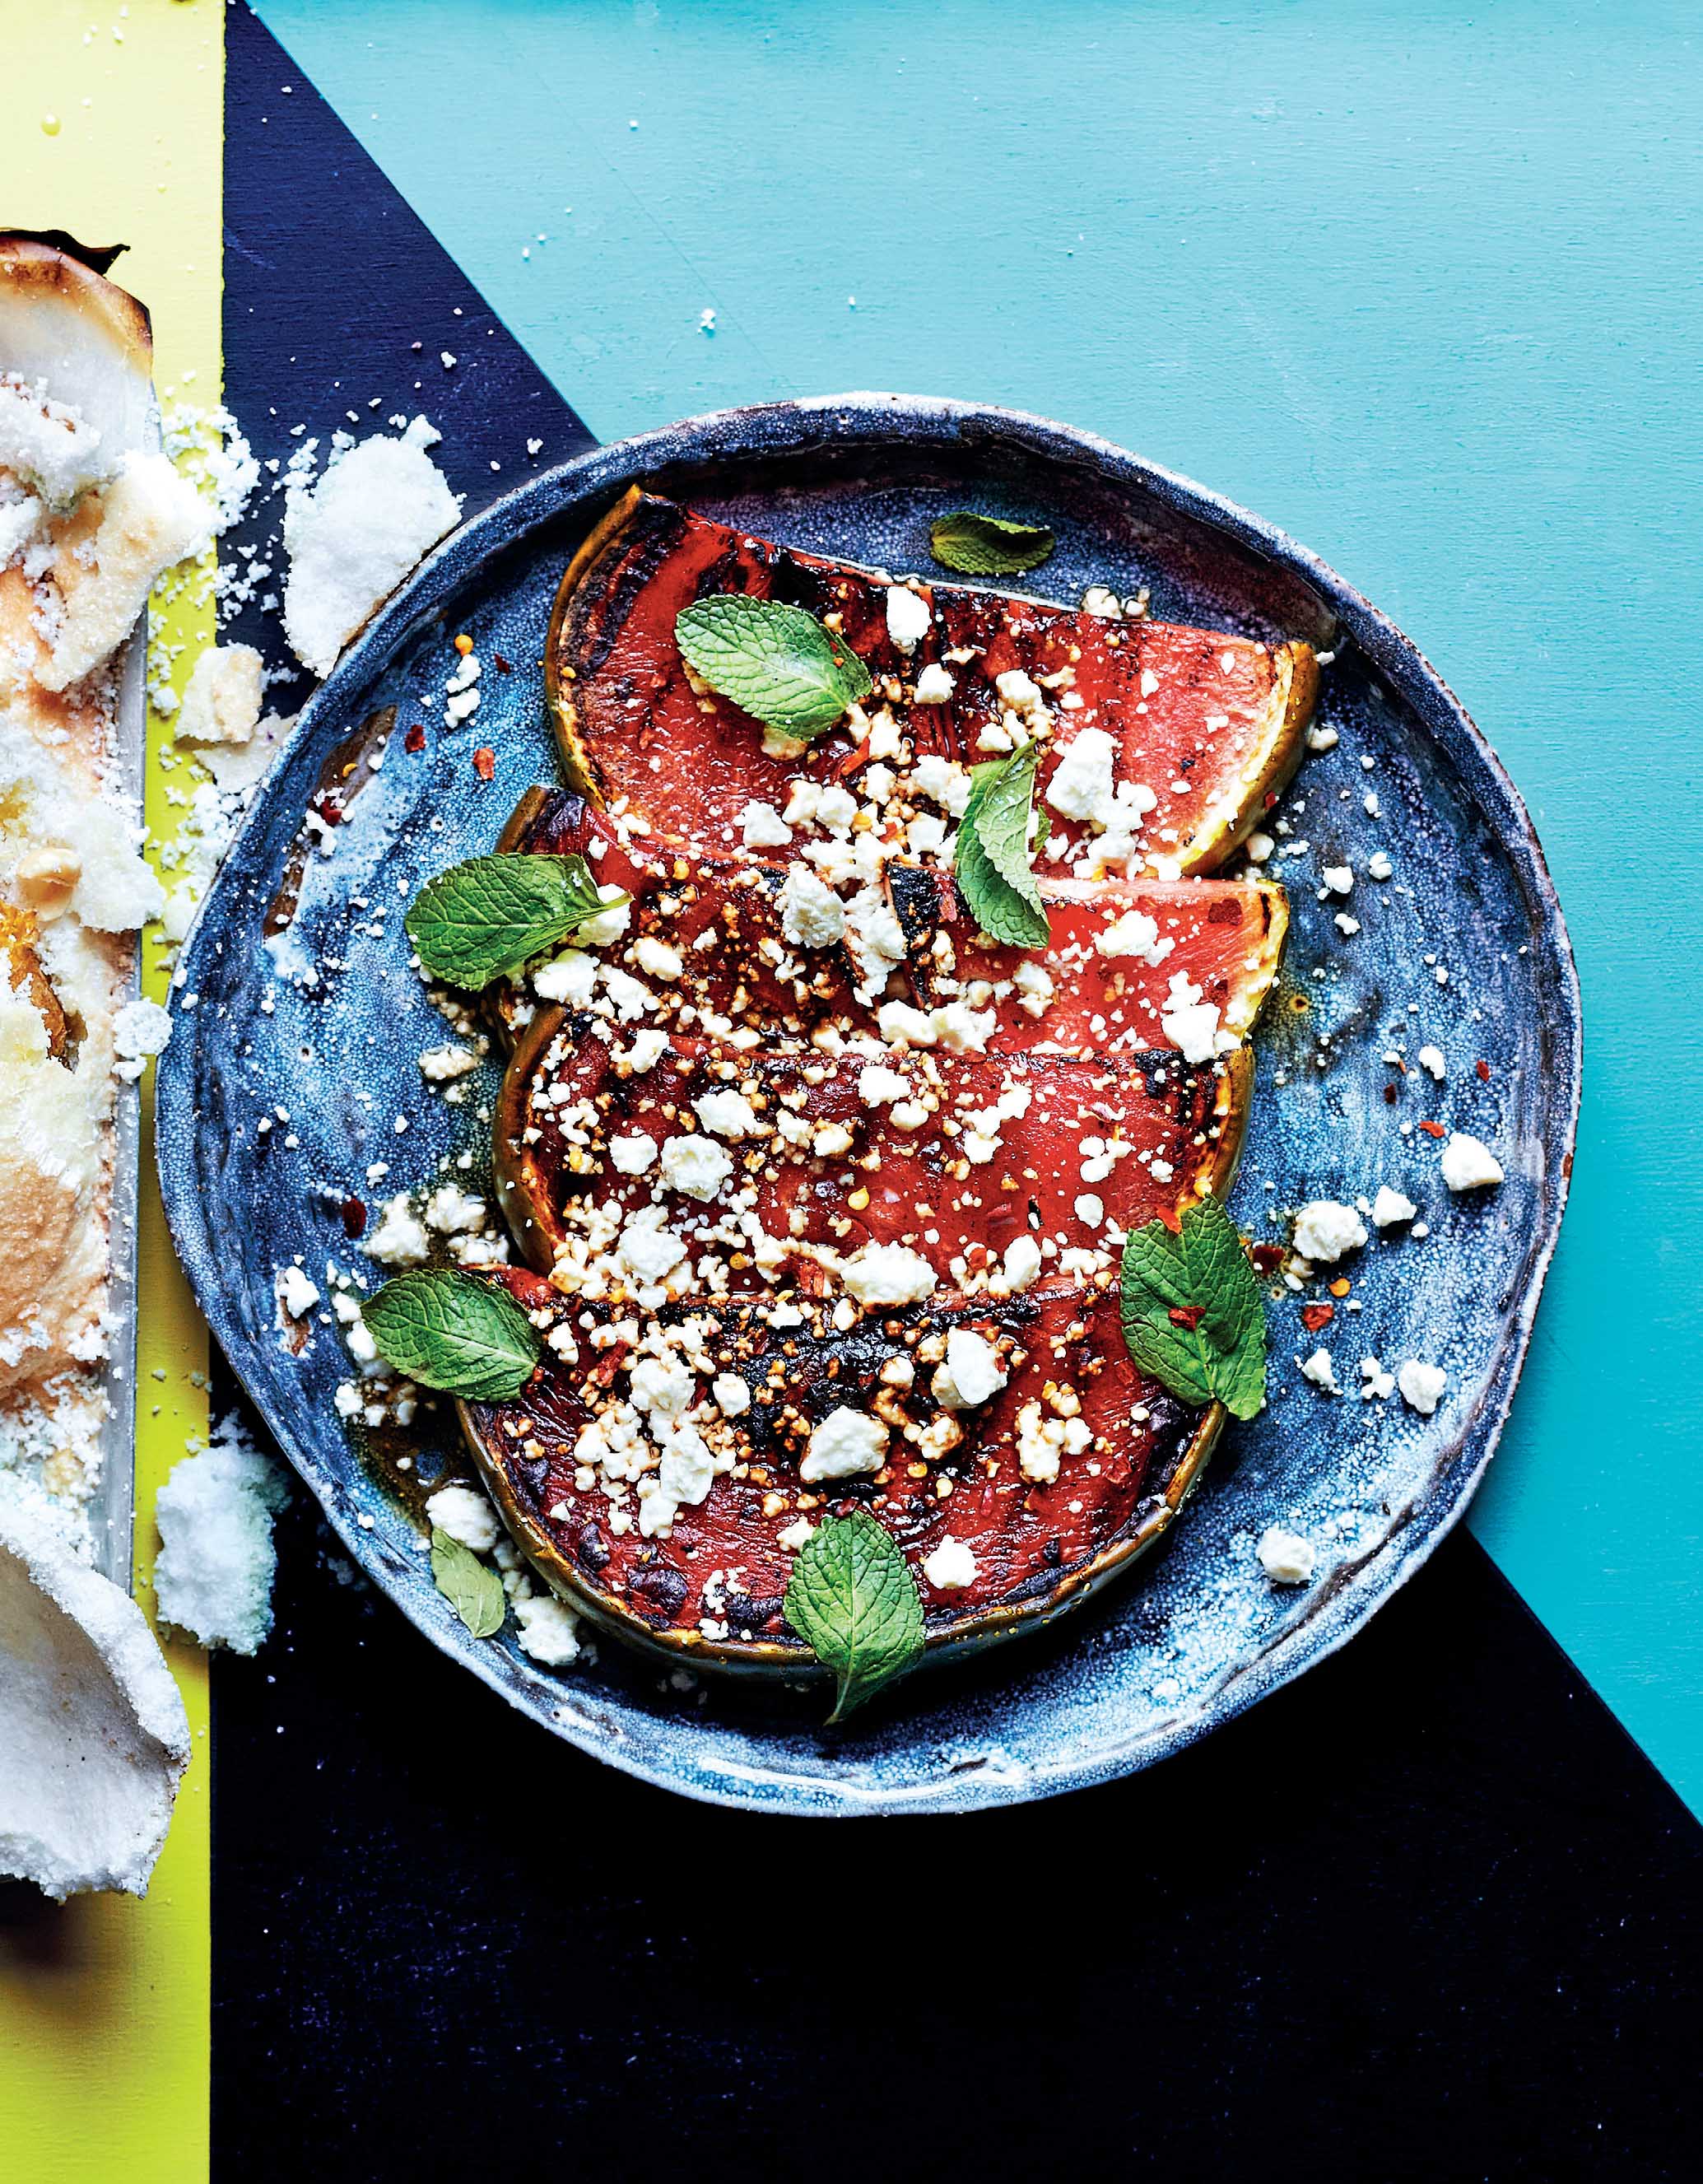 Barbecued watermelon, mint & queso fresco